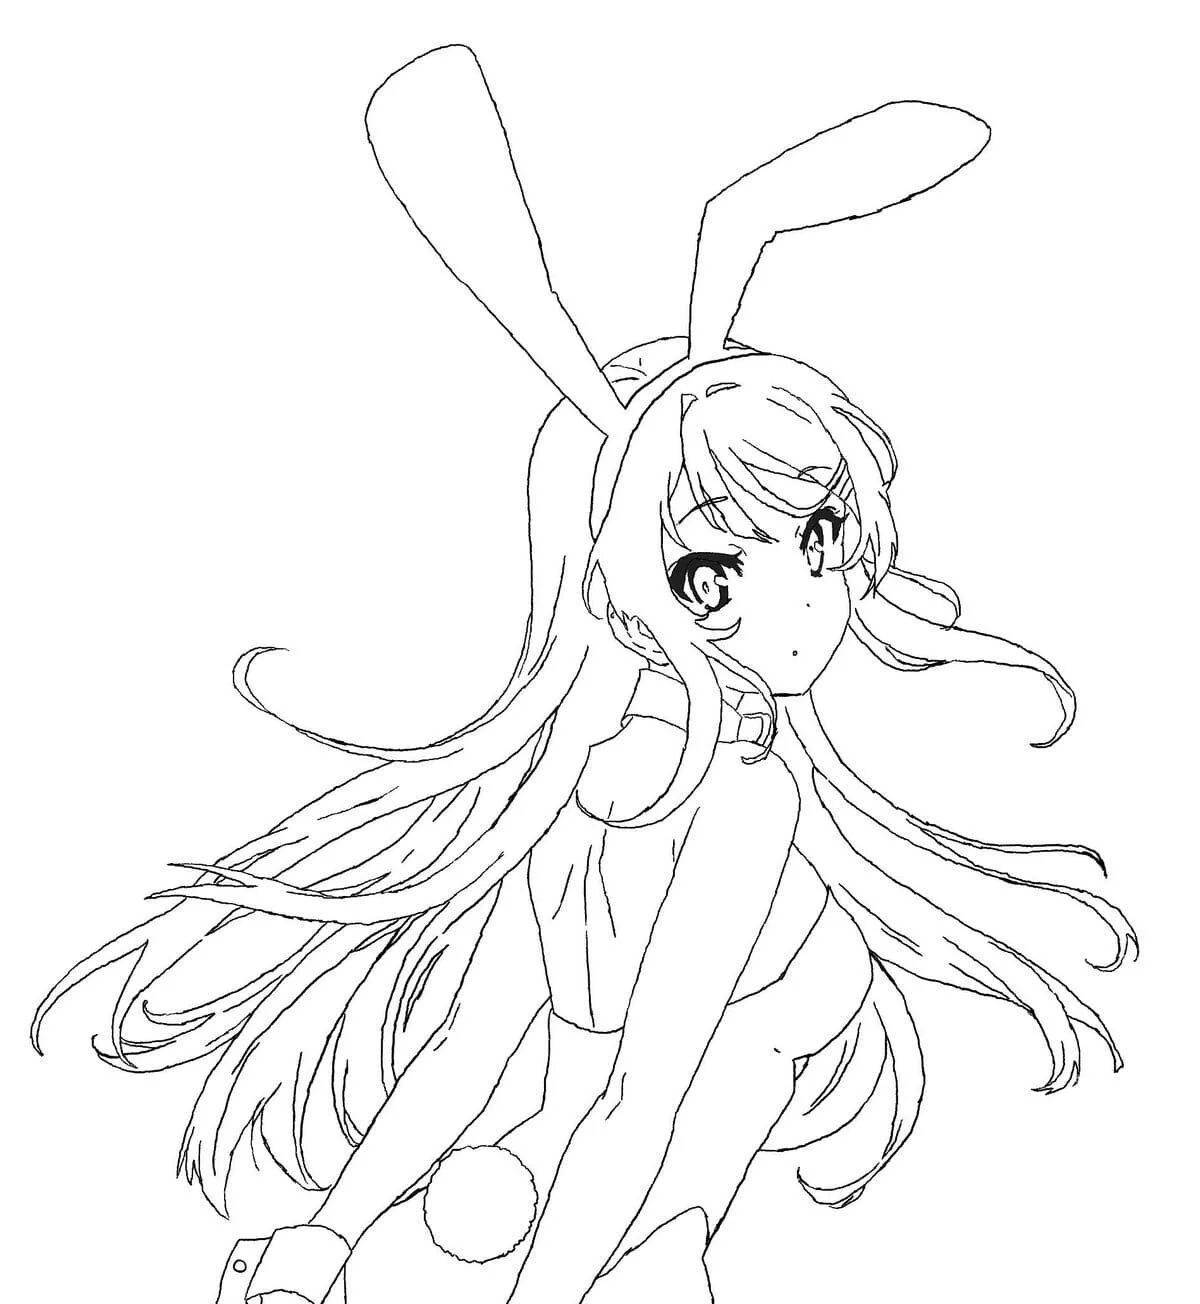 Fancy anime bunny coloring book